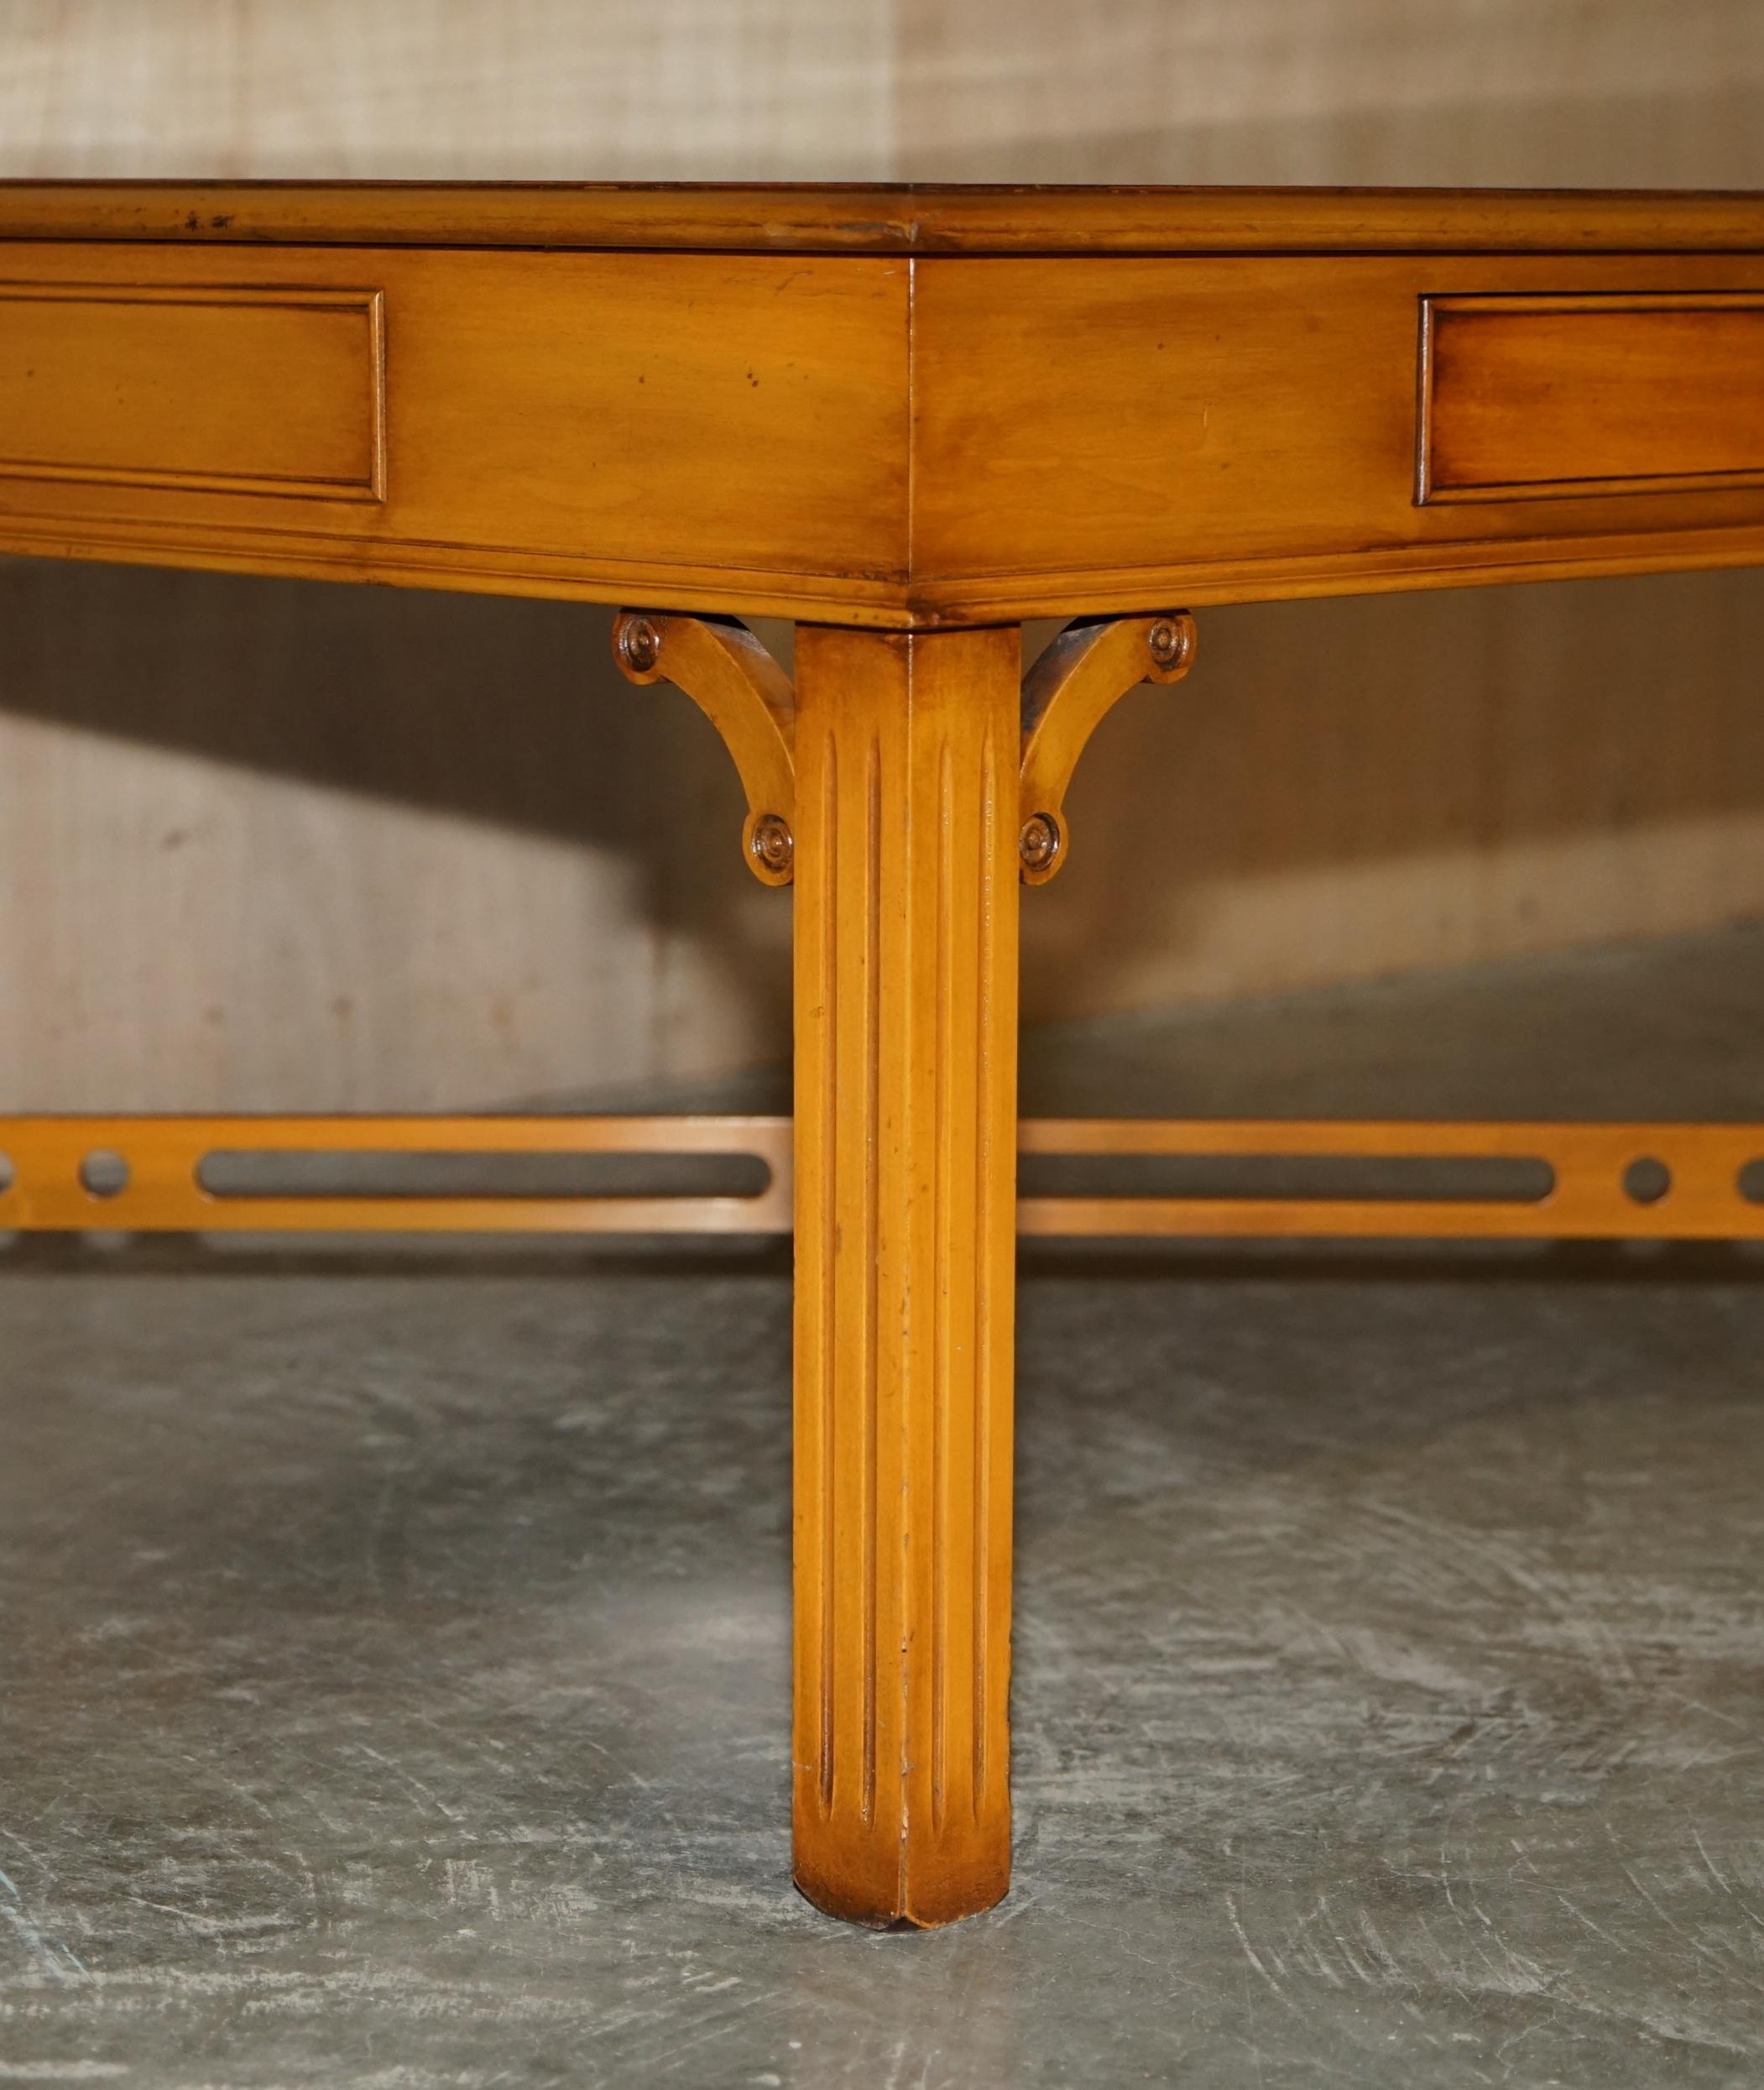 LOVELY BURR YEW WOOD TWO DRAWER COFFEE TABLE WiTH THOMAS CHIPPENDALE STRETCHES (20. Jahrhundert) im Angebot